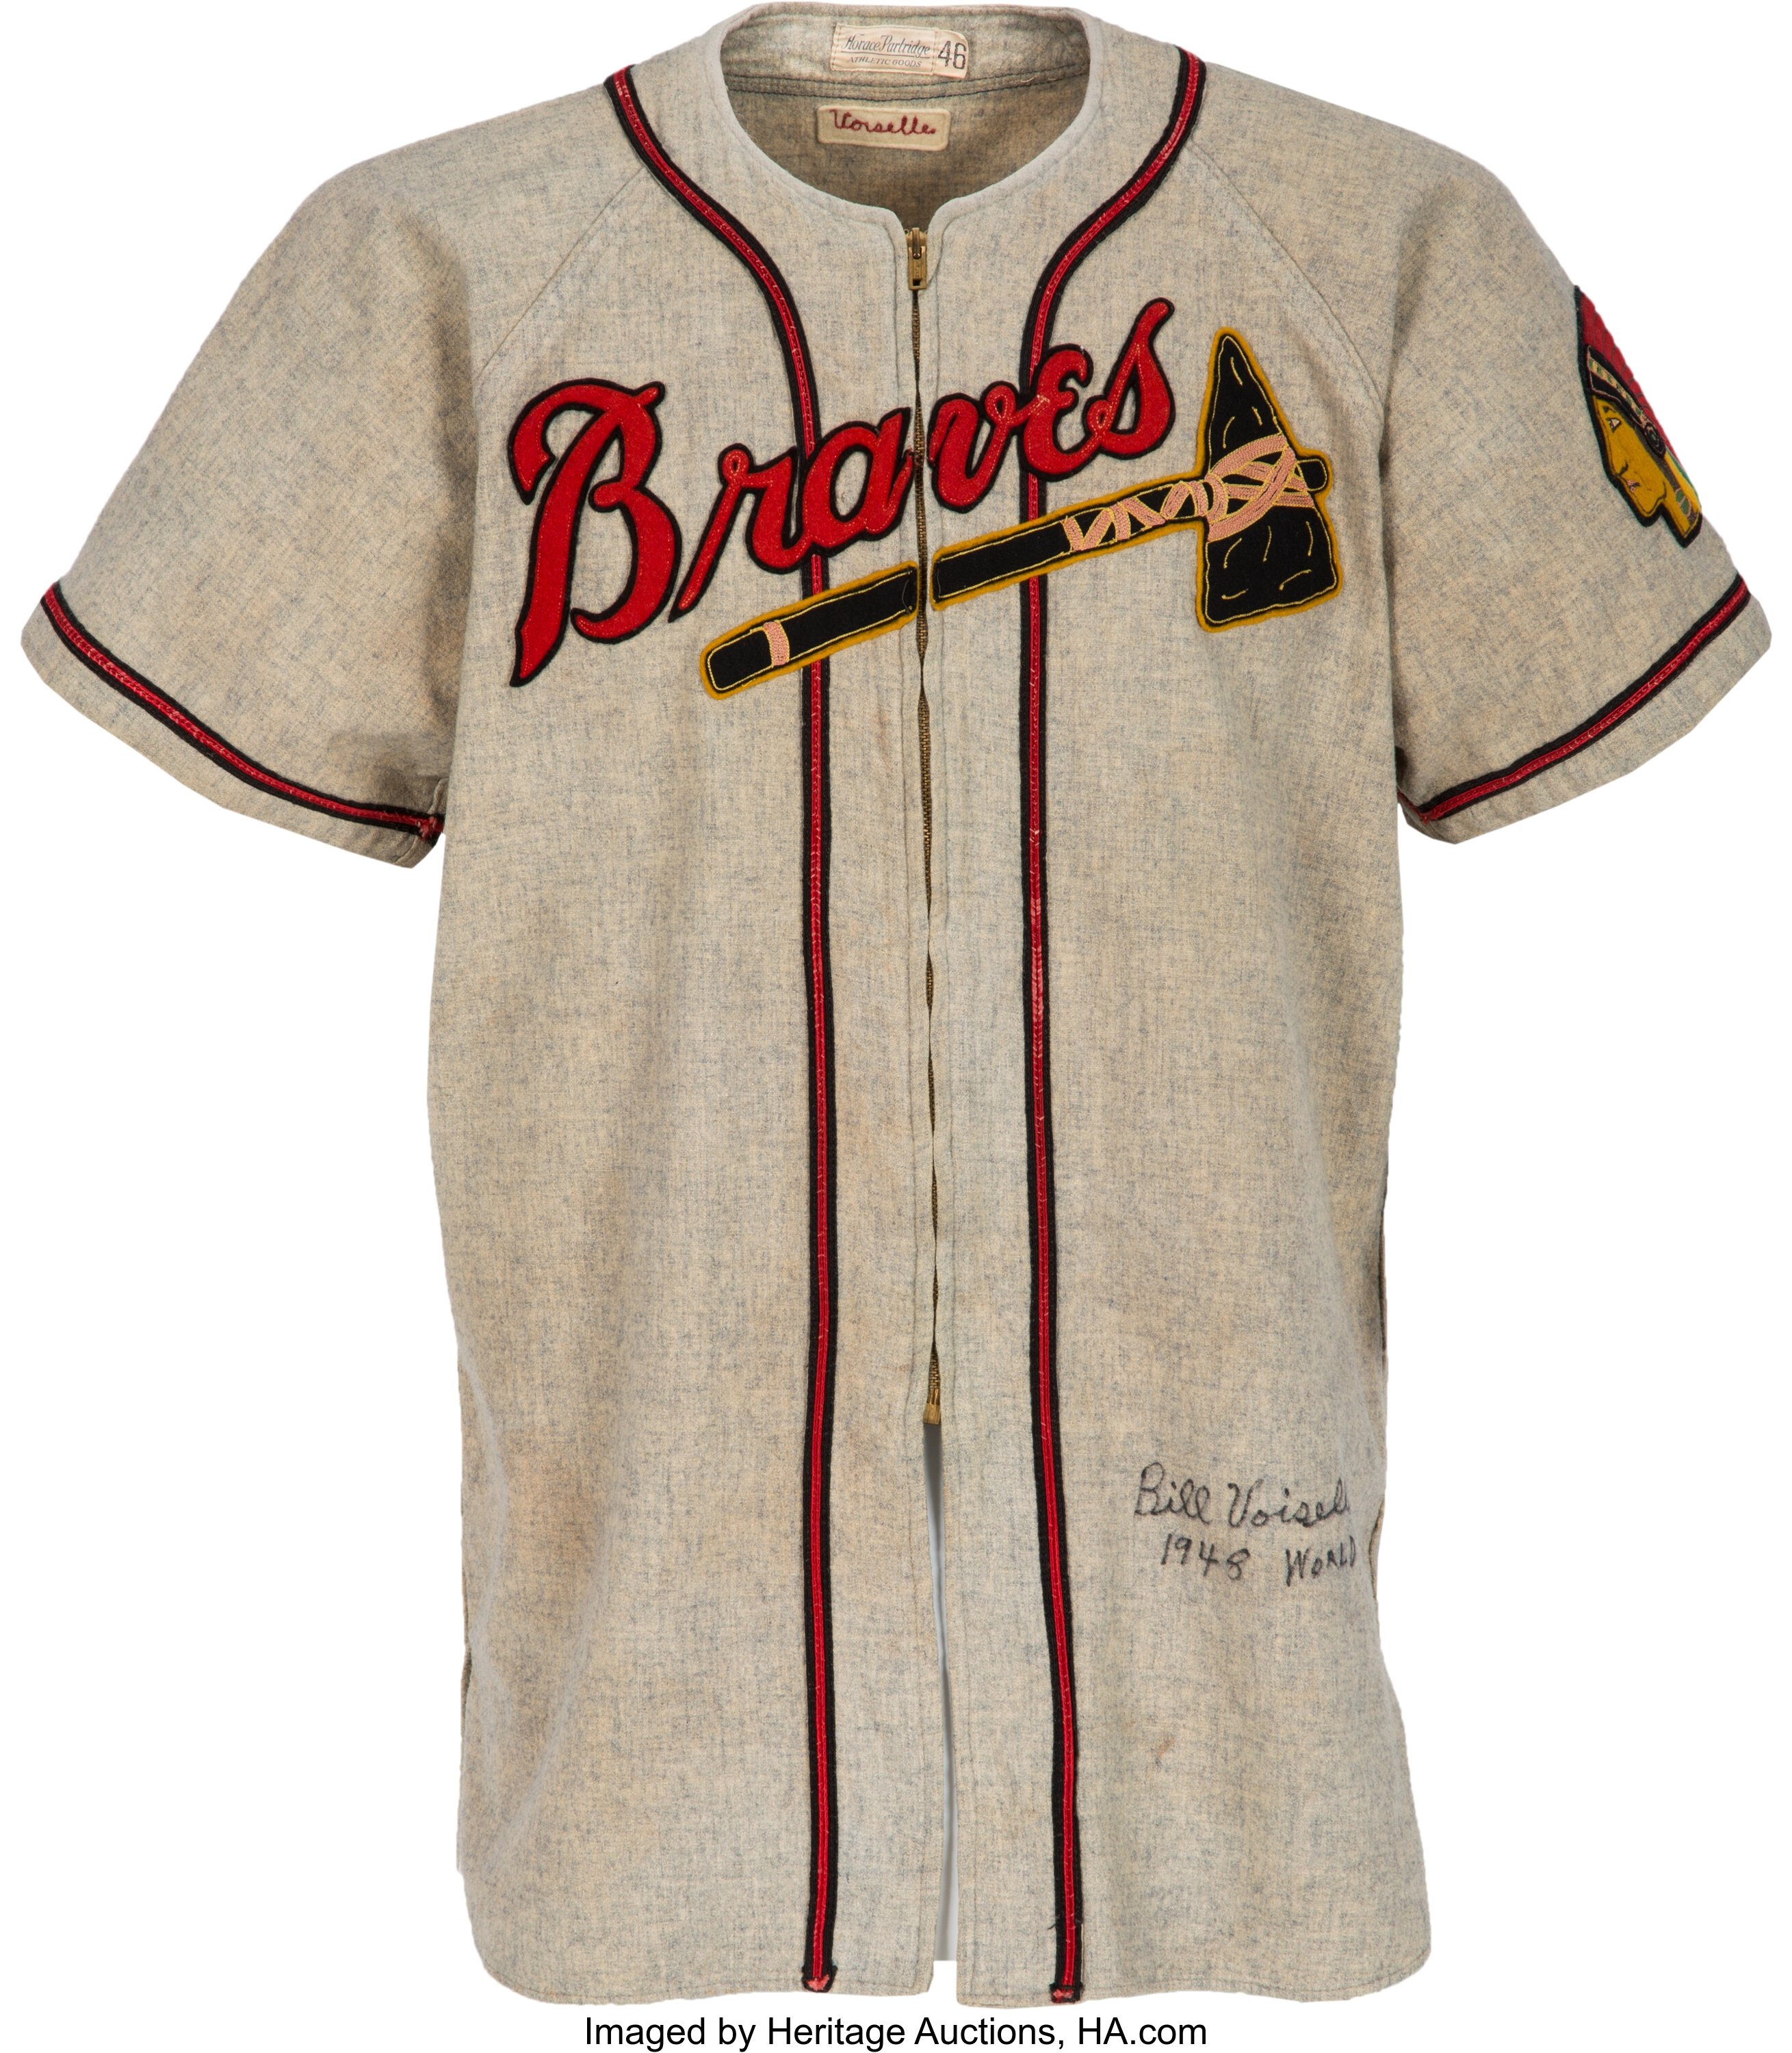 Uniforms worn for Boston Braves at Cleveland Indians on October 8